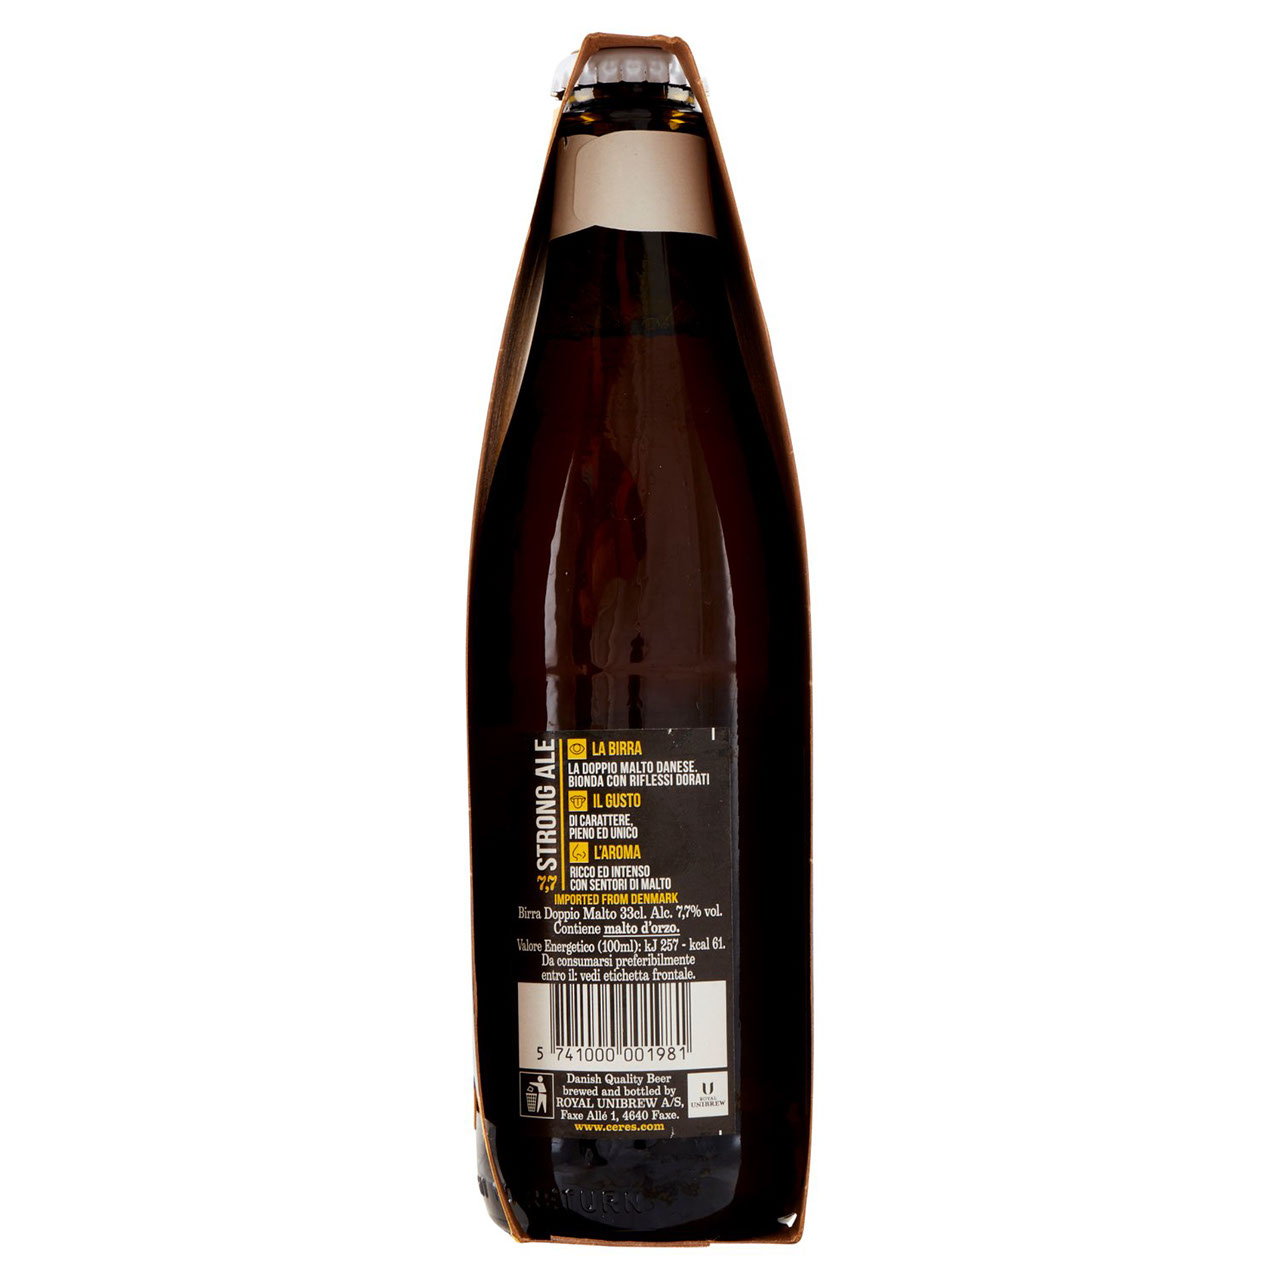 Ceres Strong Ale 7,7 3 x 33 cl in vendita online